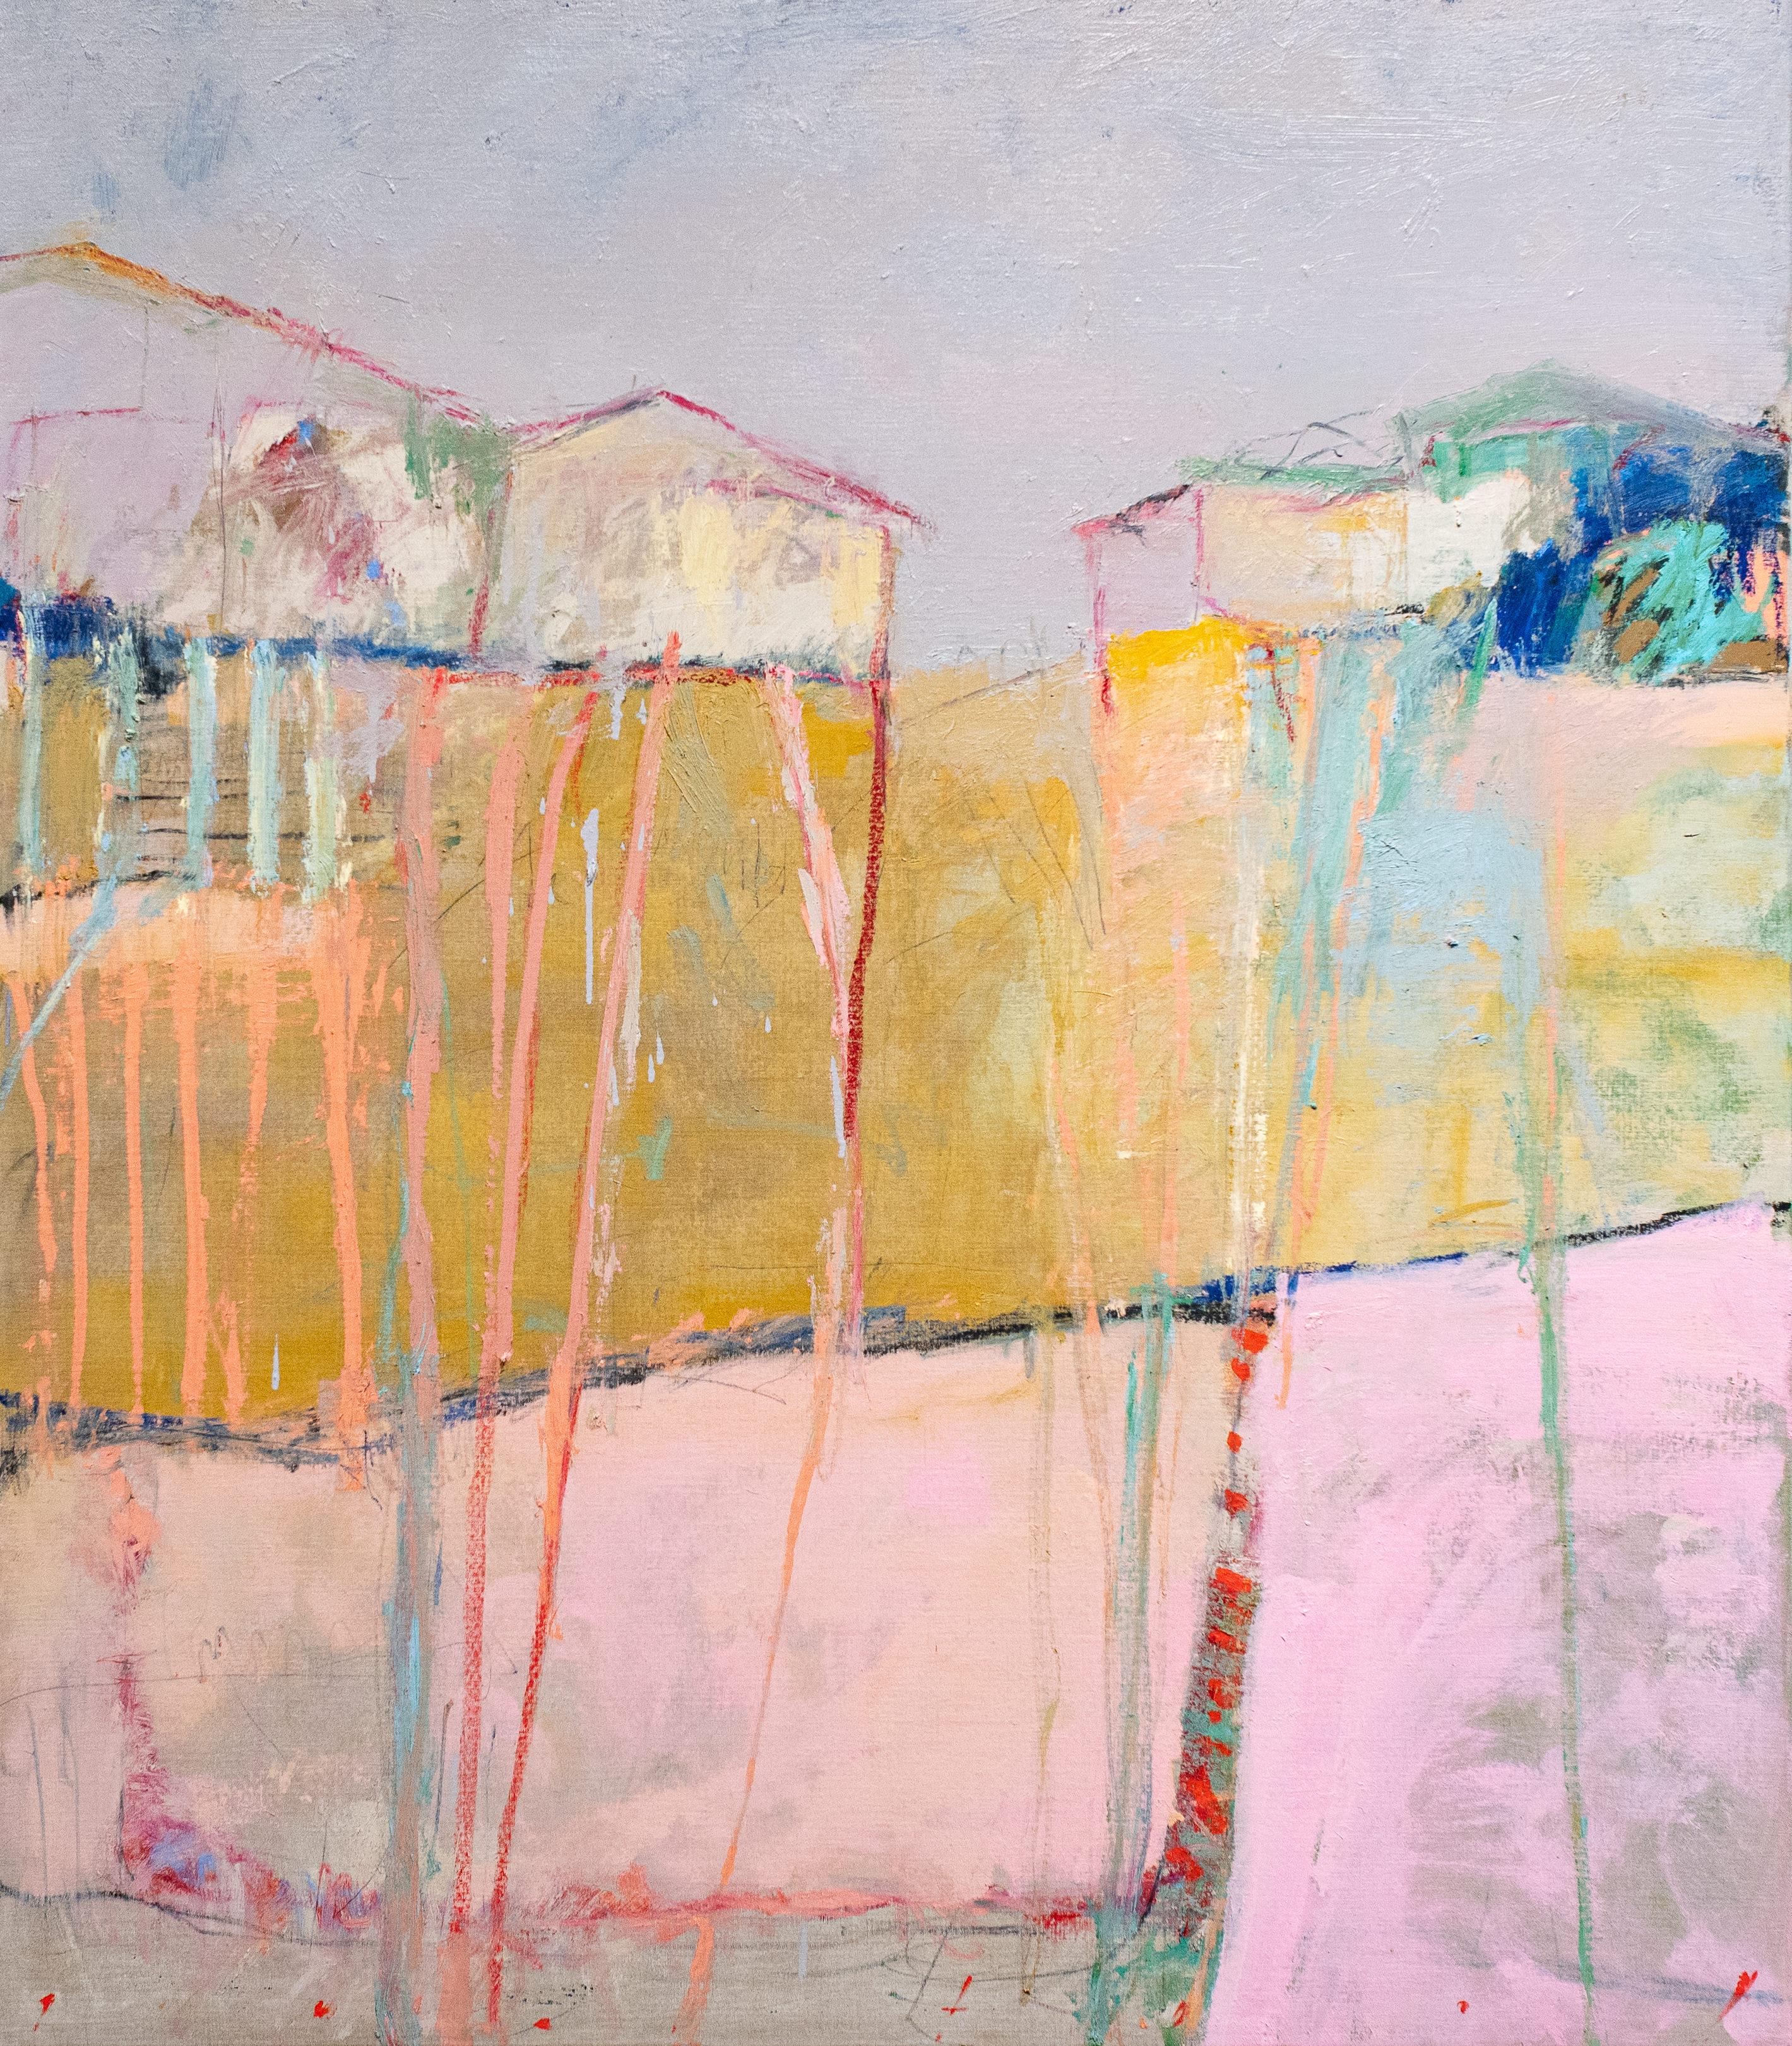 Chris Gwaltney Abstract Painting – The Orchard Behind the Houses – großes farbenfrohes abstraktes Gemälde